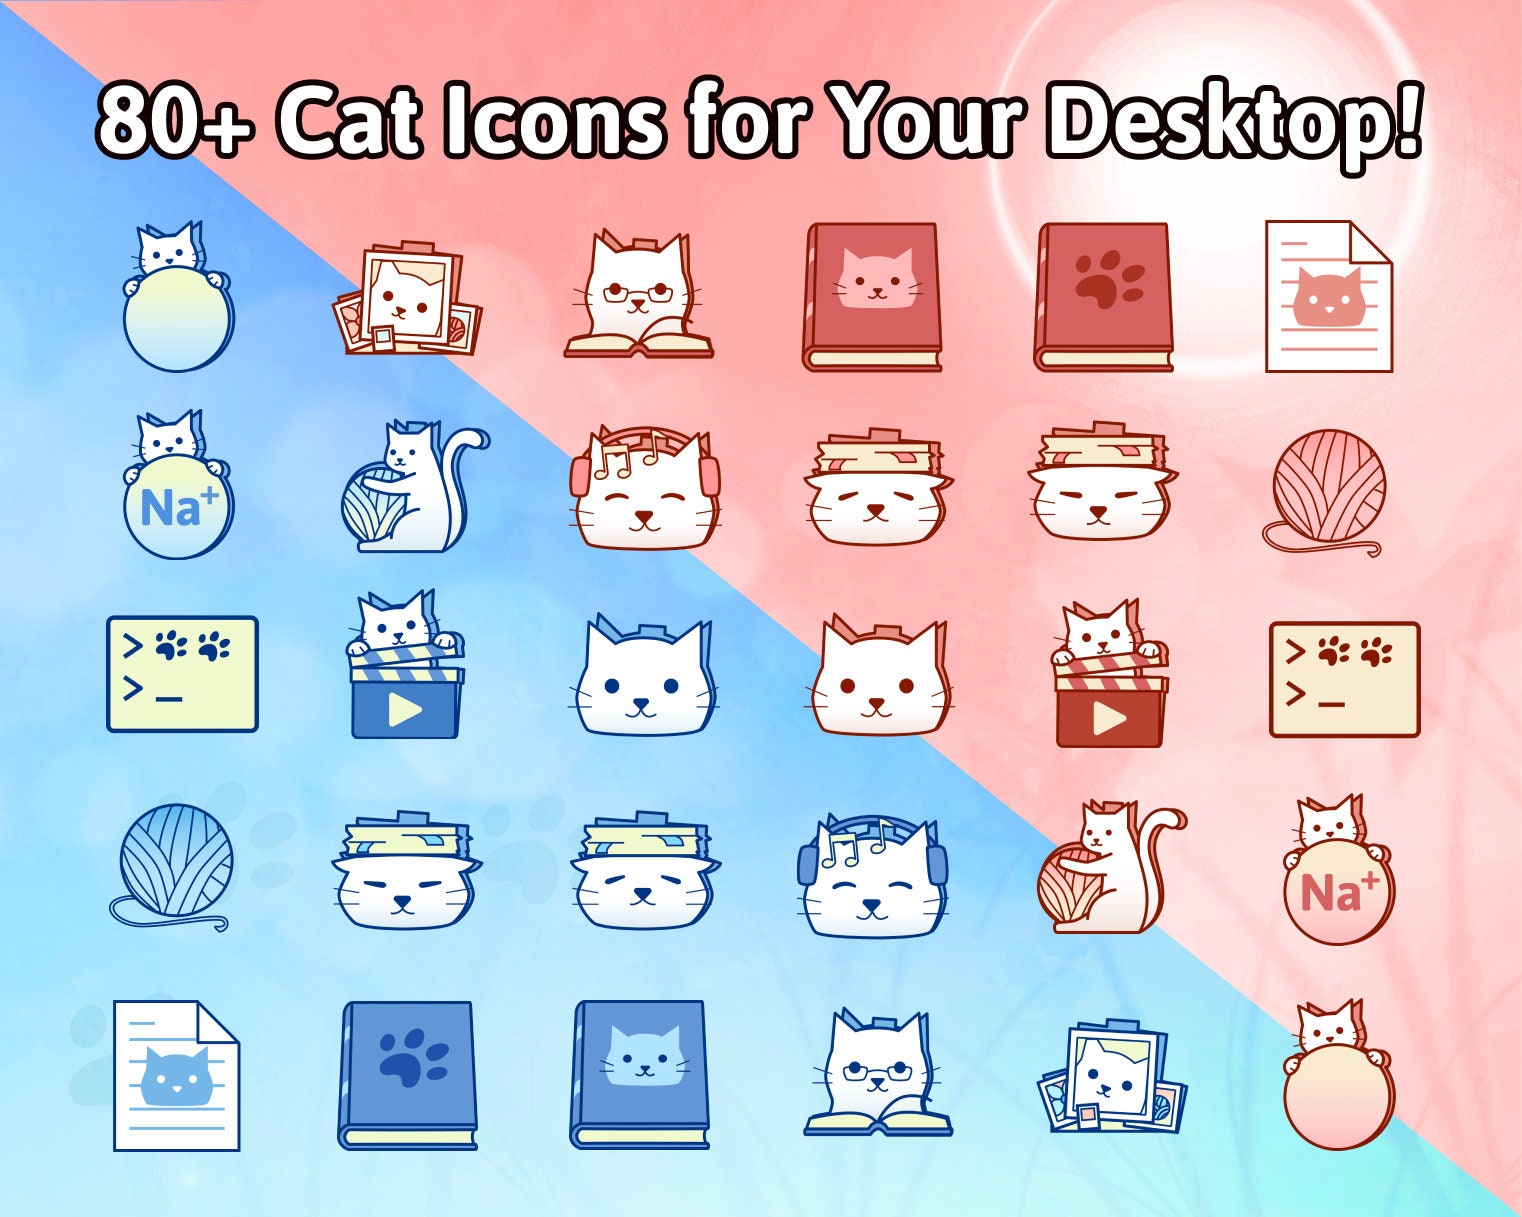 Make Your Desktop Fun With These Free Cat Icons